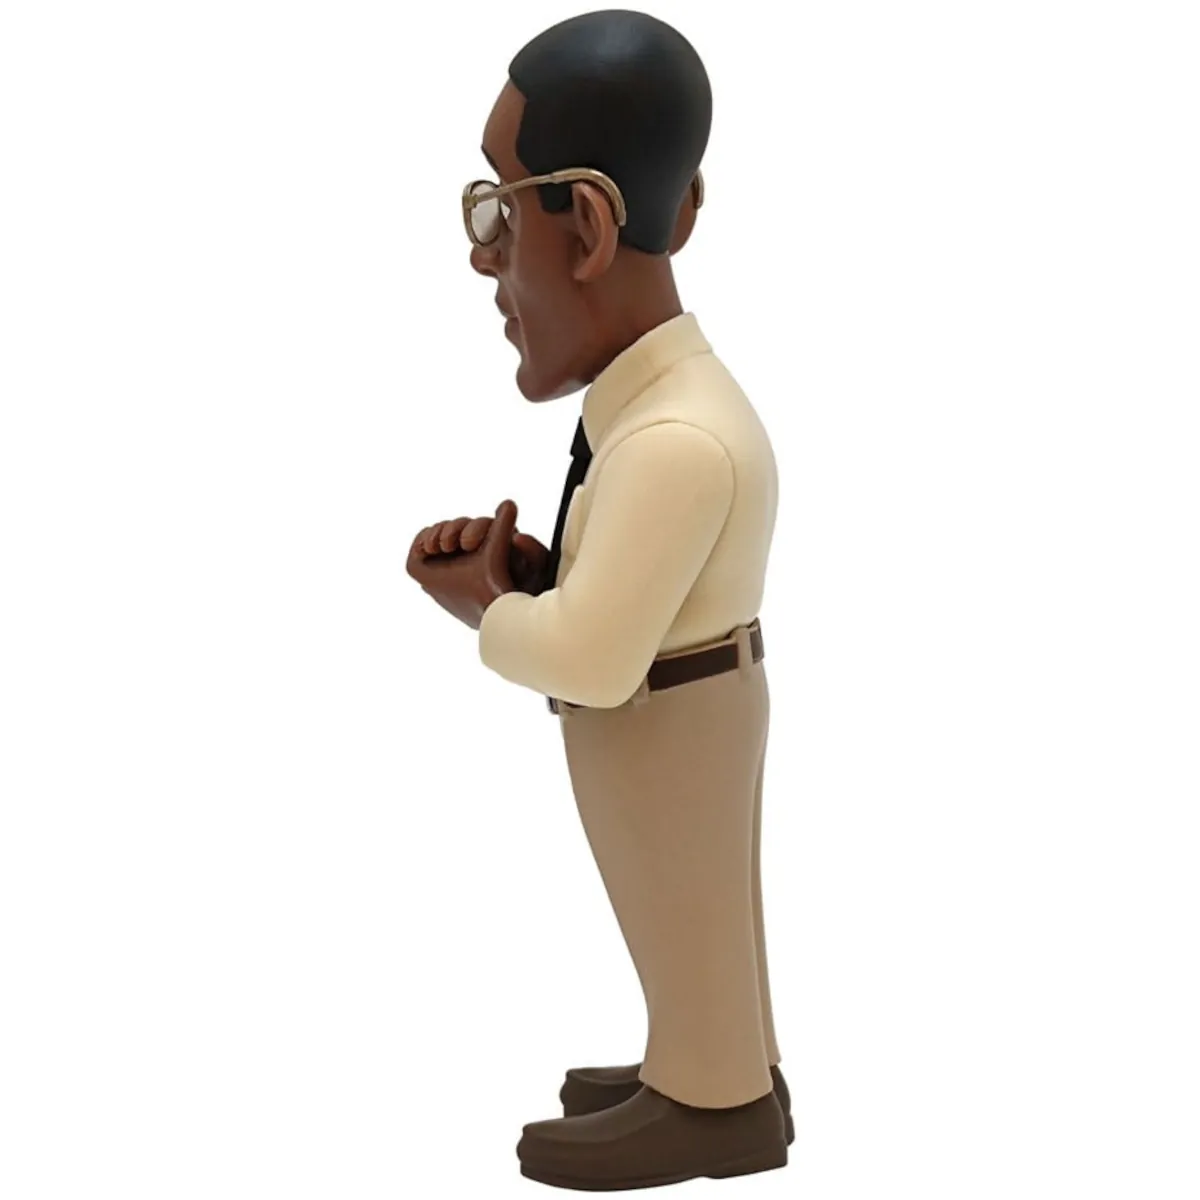 MN13371 Gus Fring (Breaking Bad) 12cm MINIX Collectable Figure 2